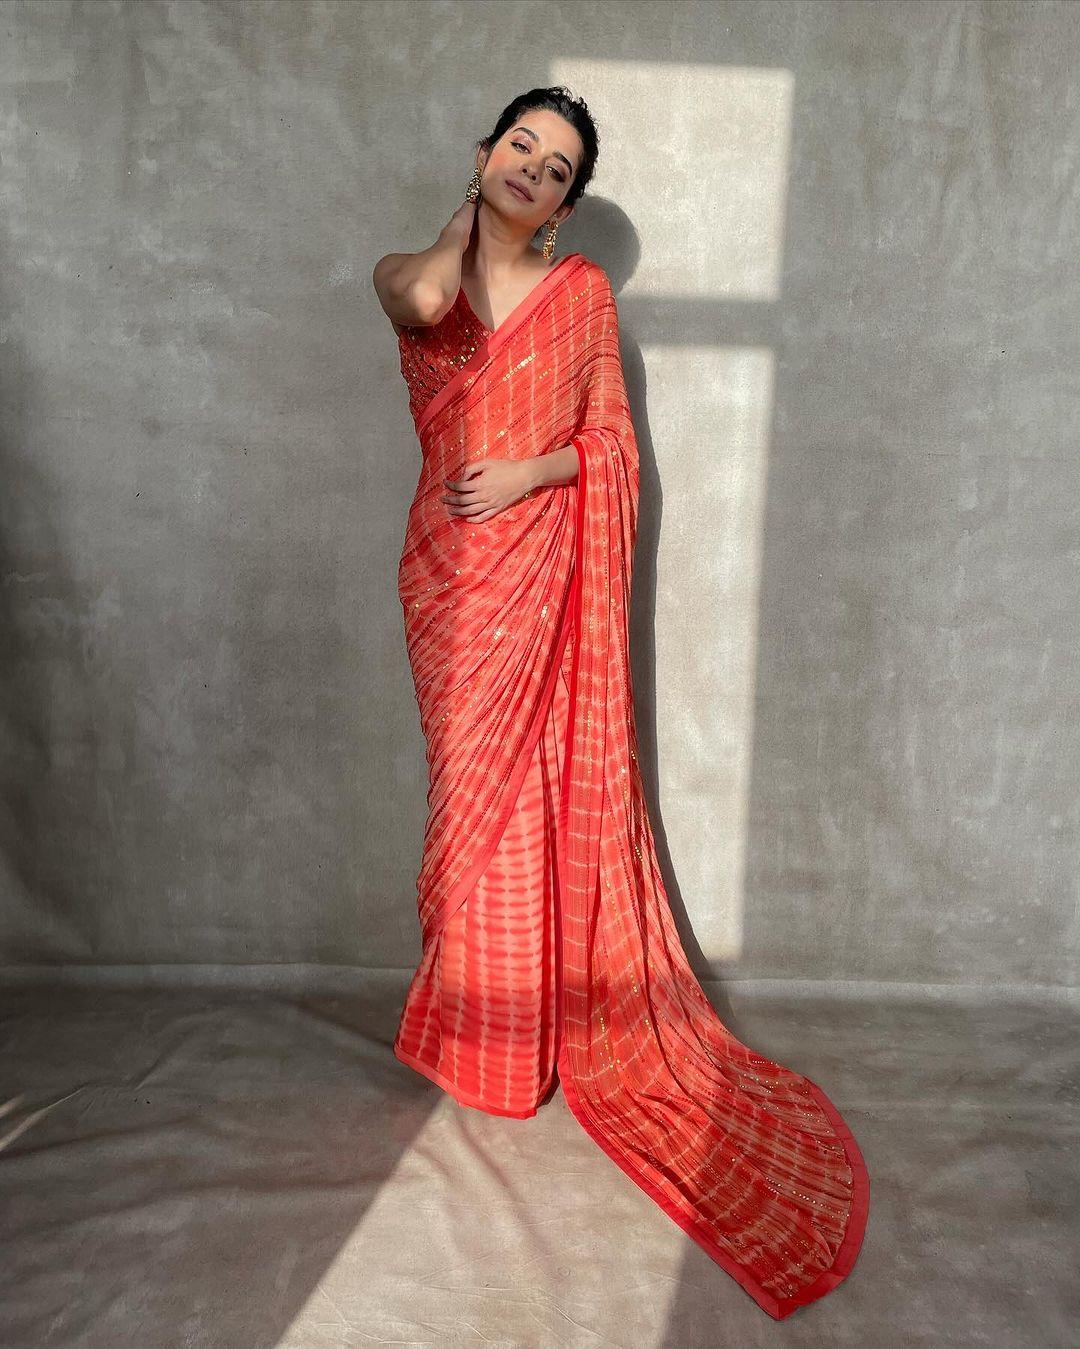 Mithila captivates in an orange saree paired with a matching blouse adorned with mirrorwork